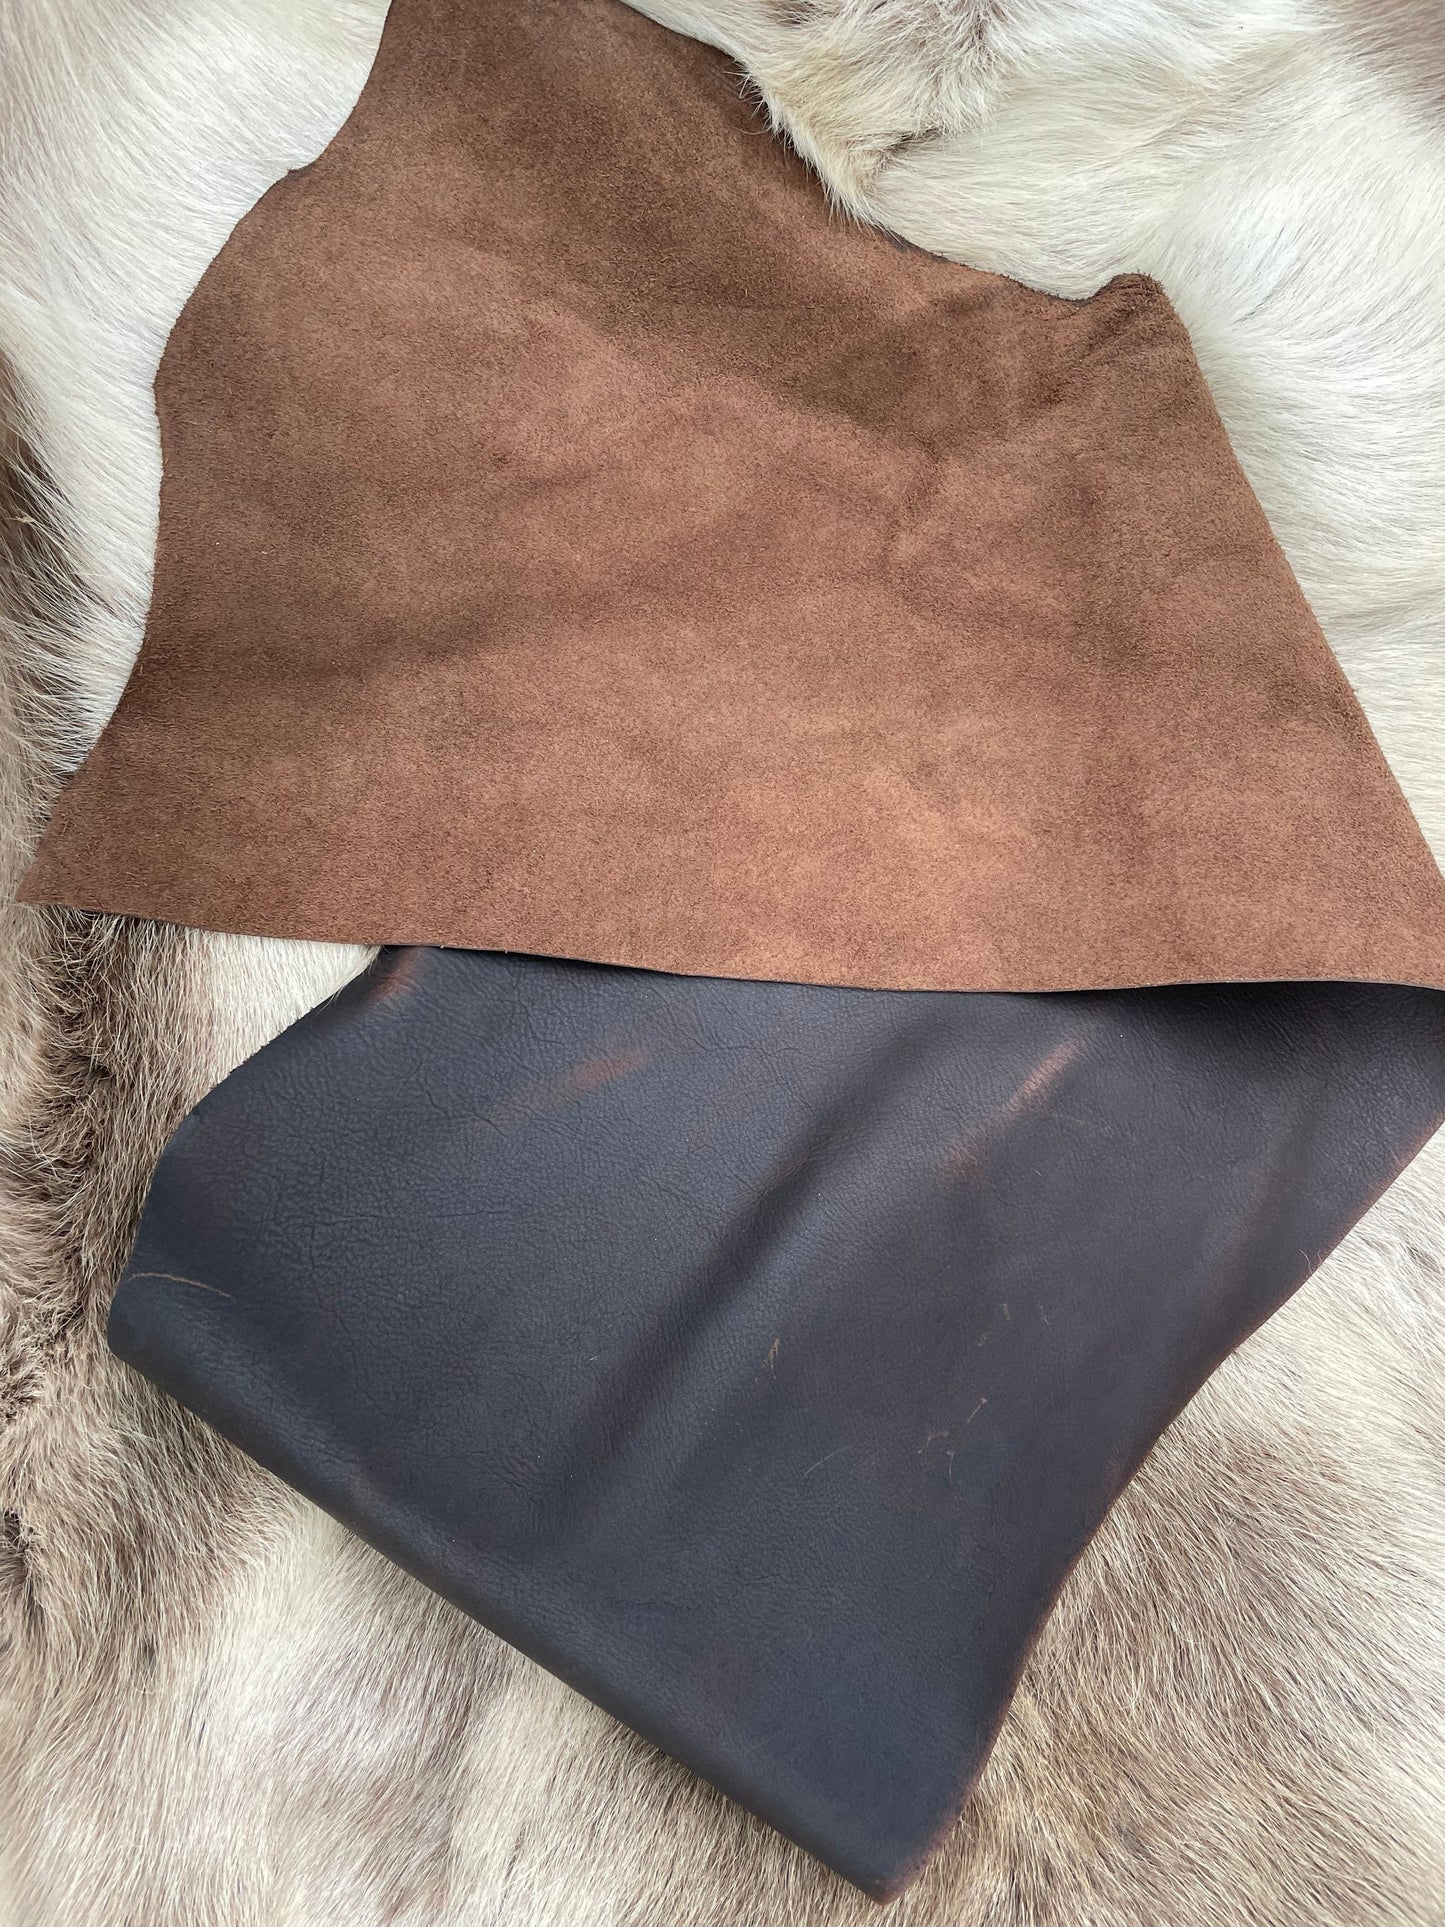 Brown Leather - Natural Leather - Leather for belts, belt liners, purses - Raw Leather - Wholesale Leather 3/4oz